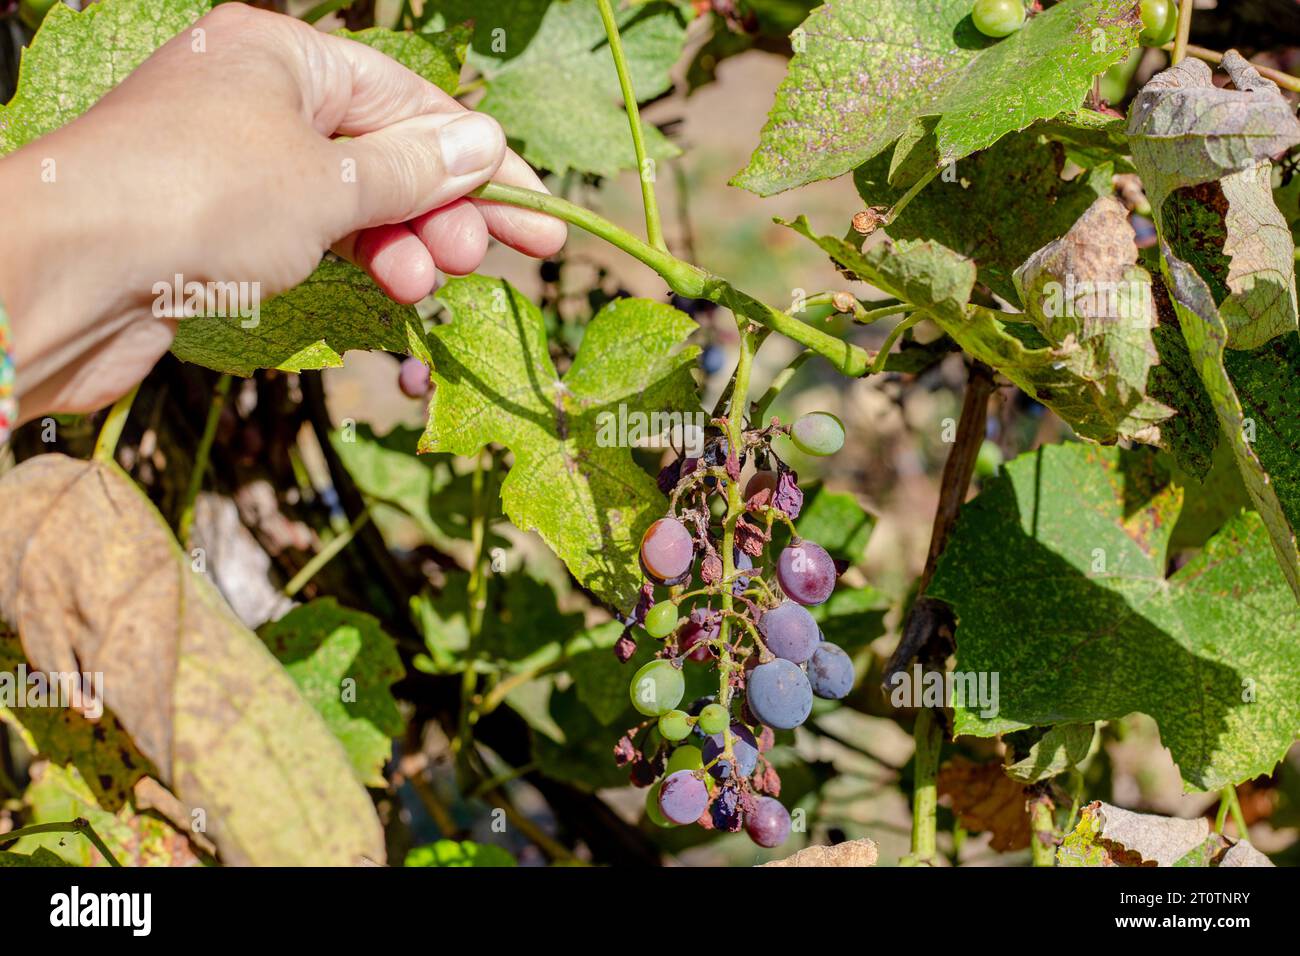 a gardener examines sick ripening grapes. Bunches of grapes on the vine. Stock Photo